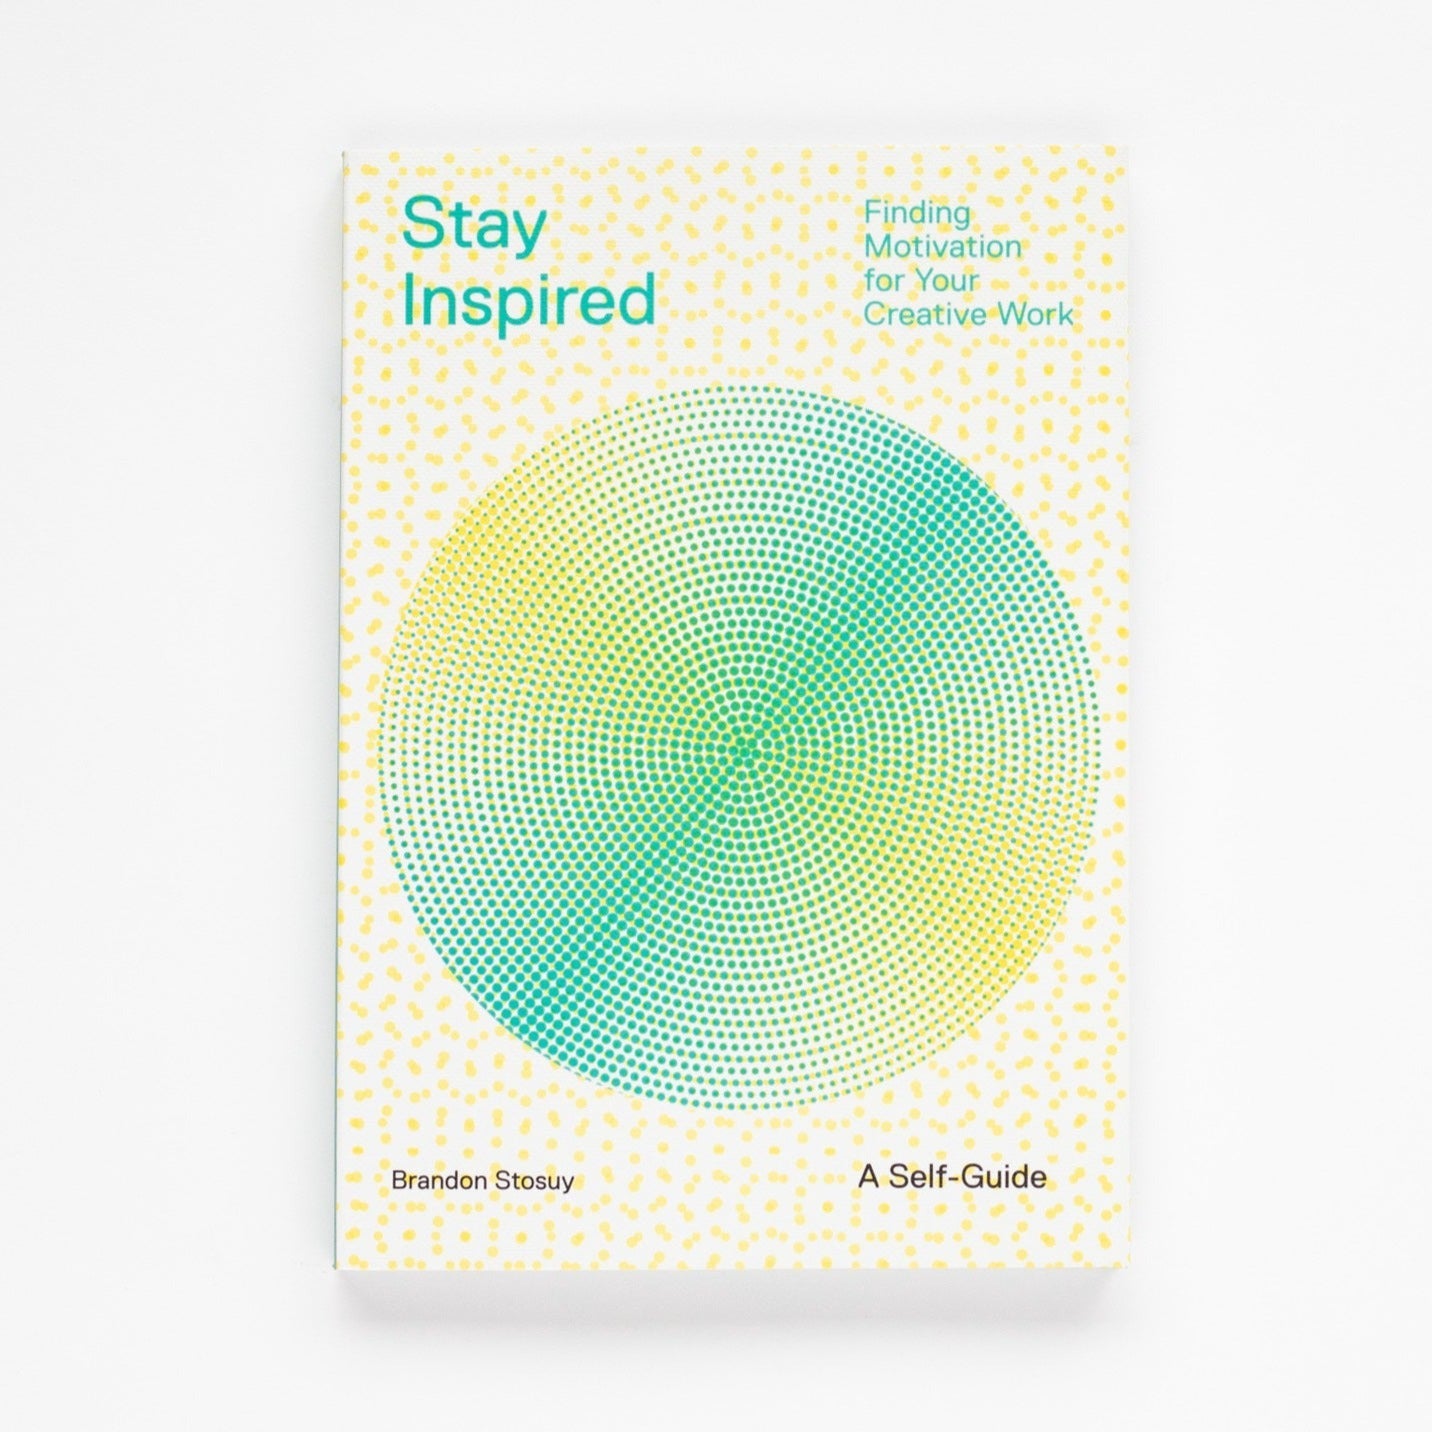 A cream colored paperback book with yellow geometric design all over and yellow and green circle in middle. Green and black text on book reads, "Stay Inspired Finding Motivation for Your Creative Work Brandon Stosuy A Self-Guide". Photographed on white background.